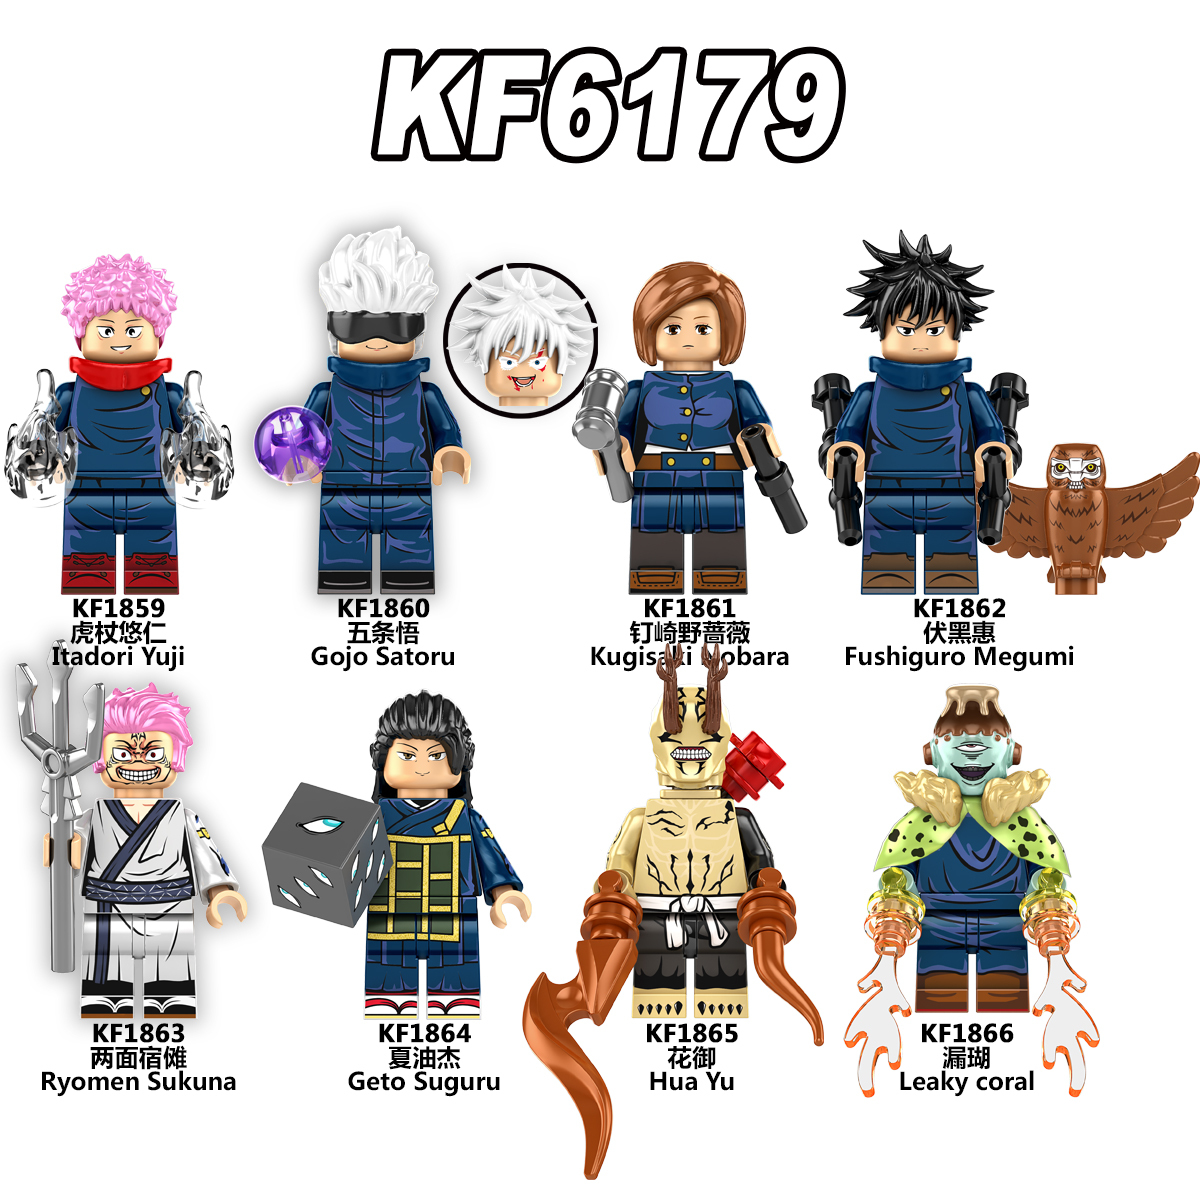 KF6179 KF1859 KF1860 KF1861 KF1862 KF1863 KF1864 KF1865 KF1866 Anime Series Jujutsu Kaisen Building Blocks Book Action Figures Educational Collection Toys For Kids